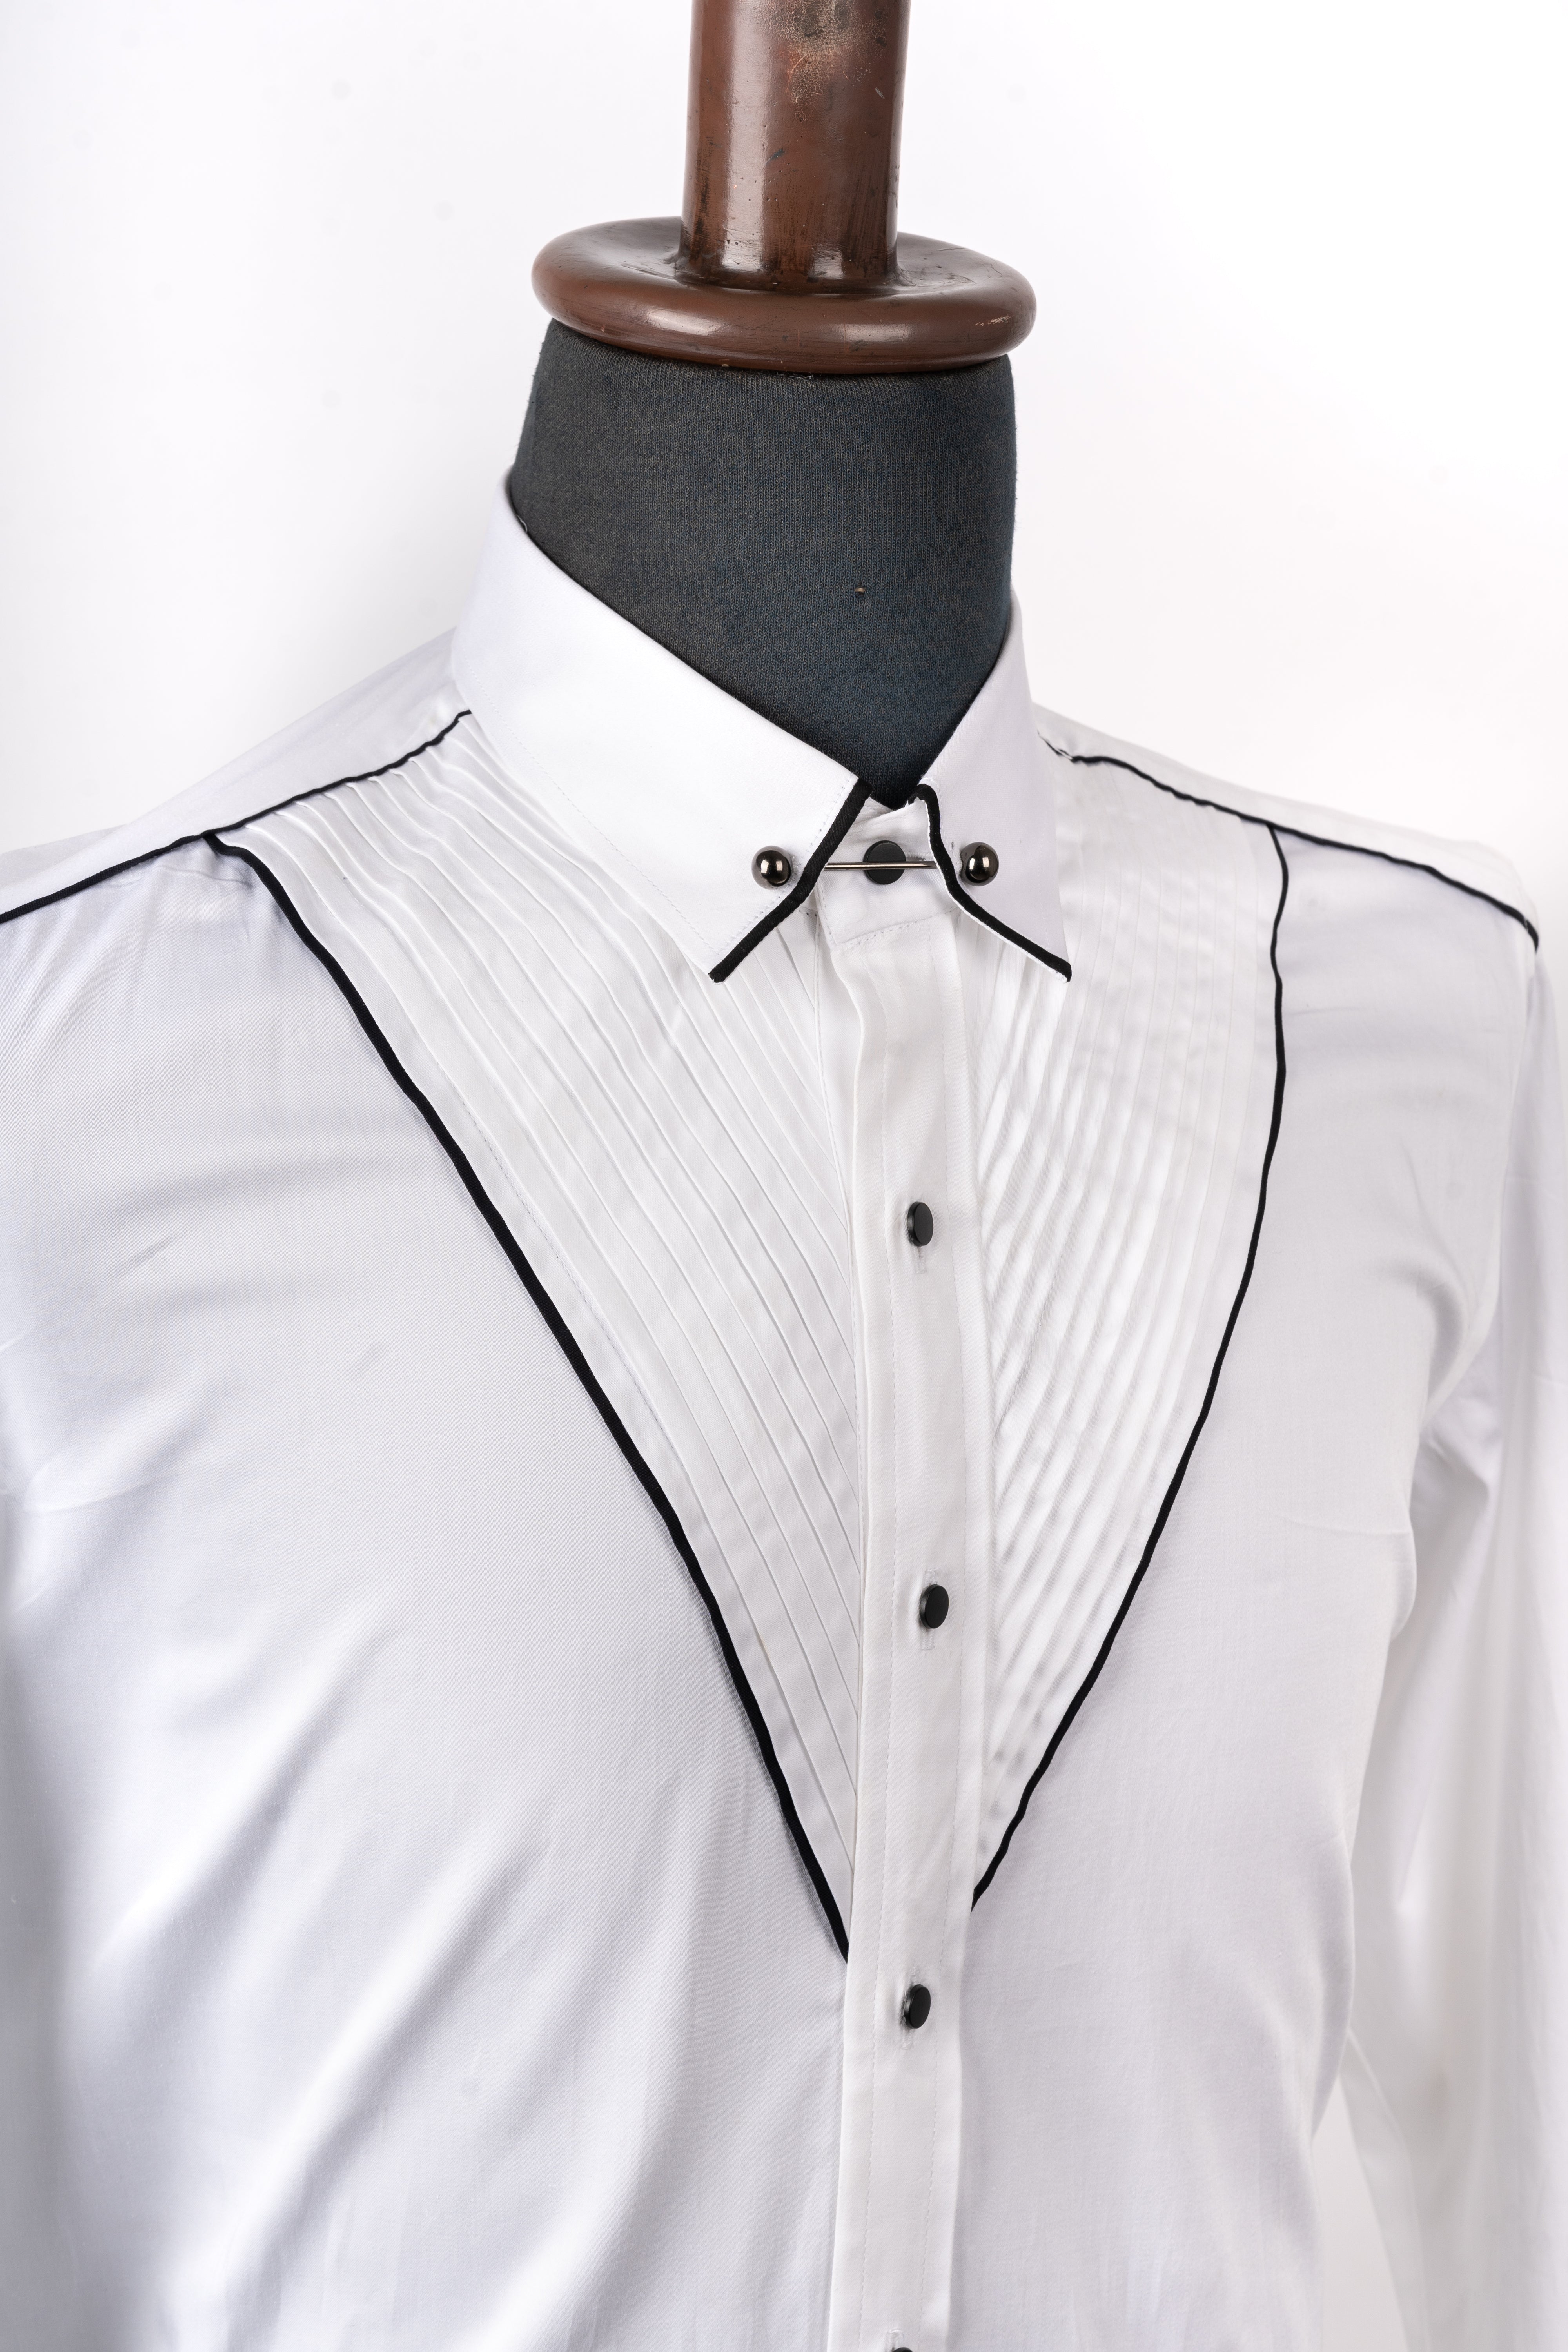 White vertical pleated shirt with regular formal collar and black buttons